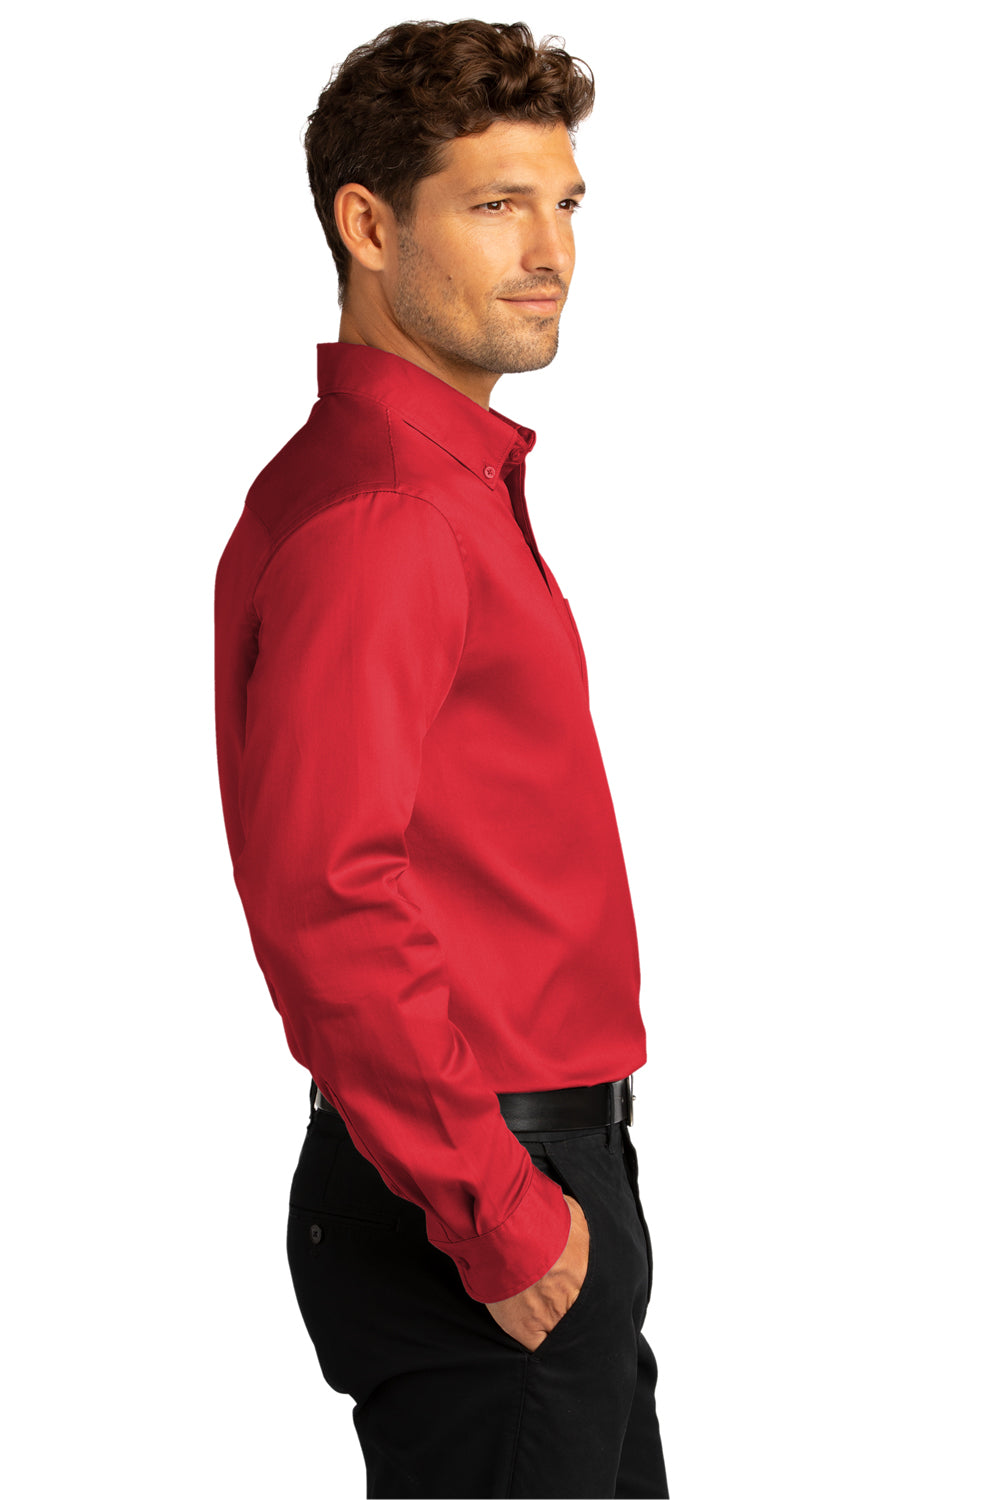 Port Authority Mens SuperPro Wrinkle Resistant React Long Sleeve Button Down Shirt w/ Pocket Rich Red Side